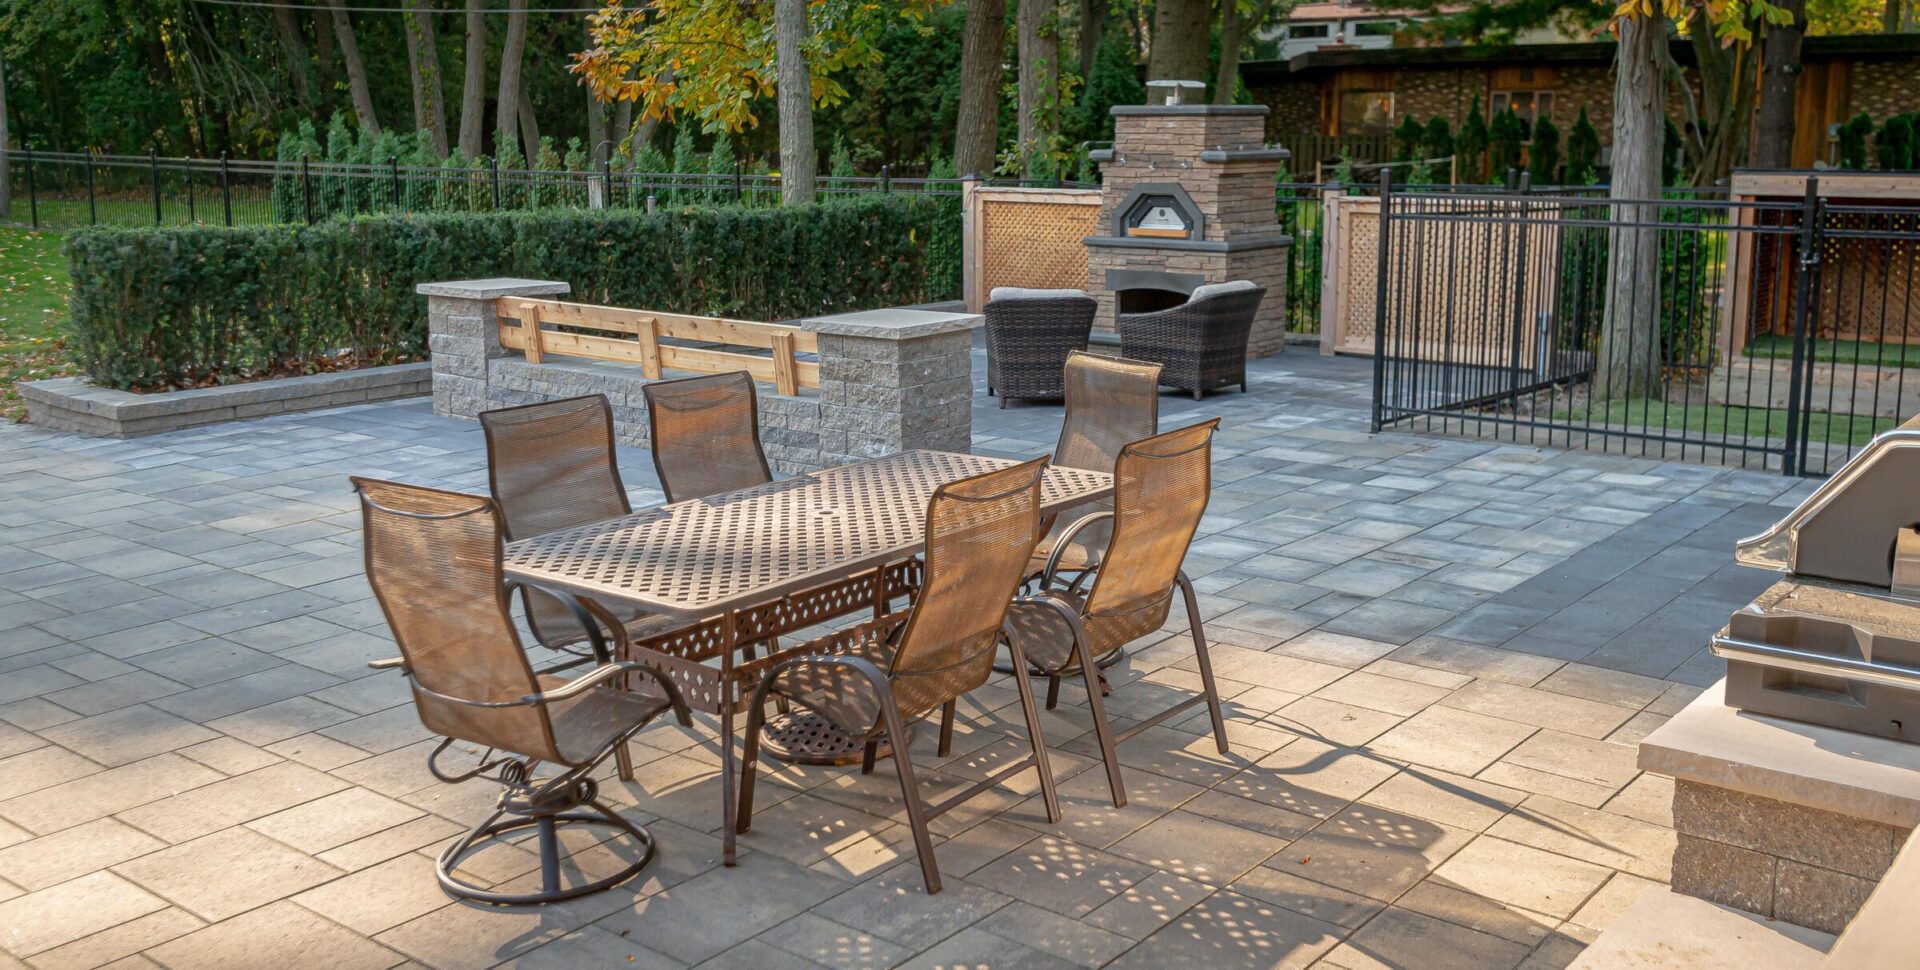 An outdoor patio with a dining table, chairs, stone benches, a pizza oven, and a grill set in a landscaped yard enclosed by a metal fence.